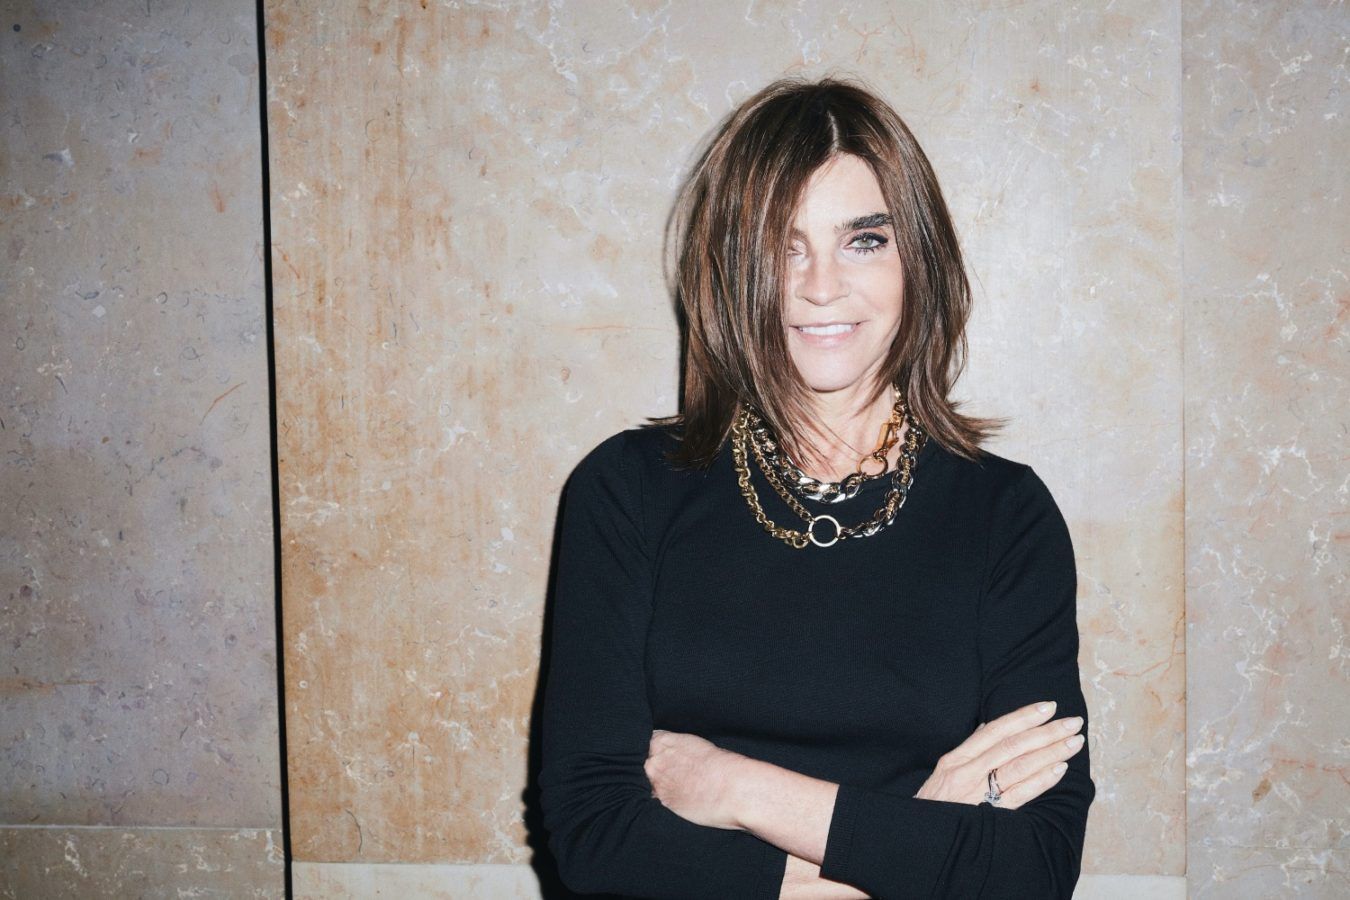 Carine Roitfeld and Adrian Cheng on the art of attire